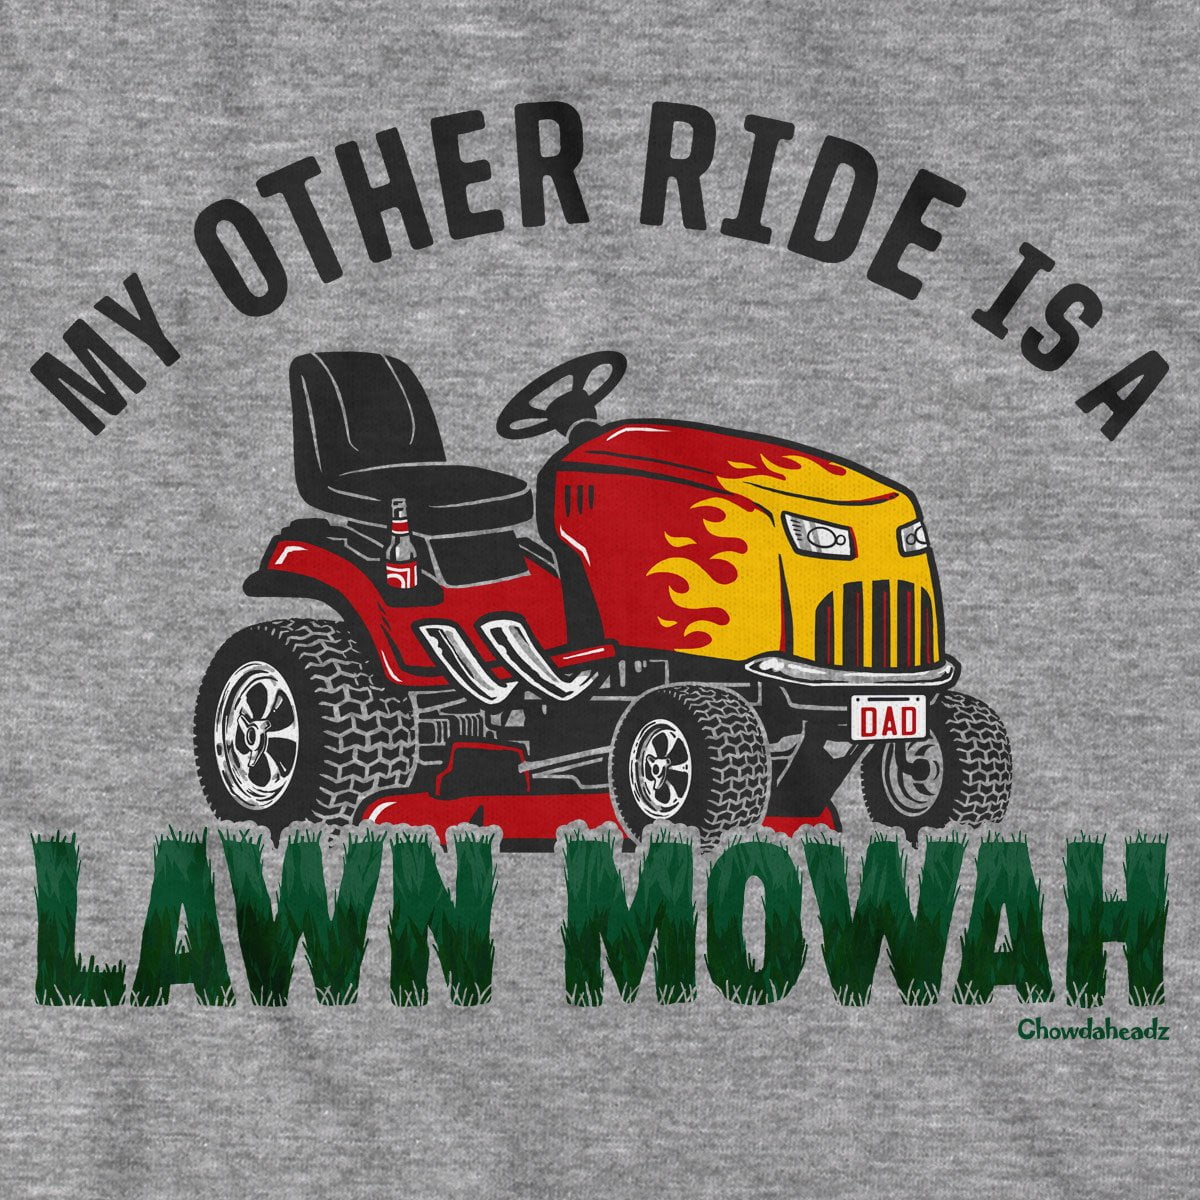 My Other Ride is a Lawn Mowah T-Shirt - Chowdaheadz